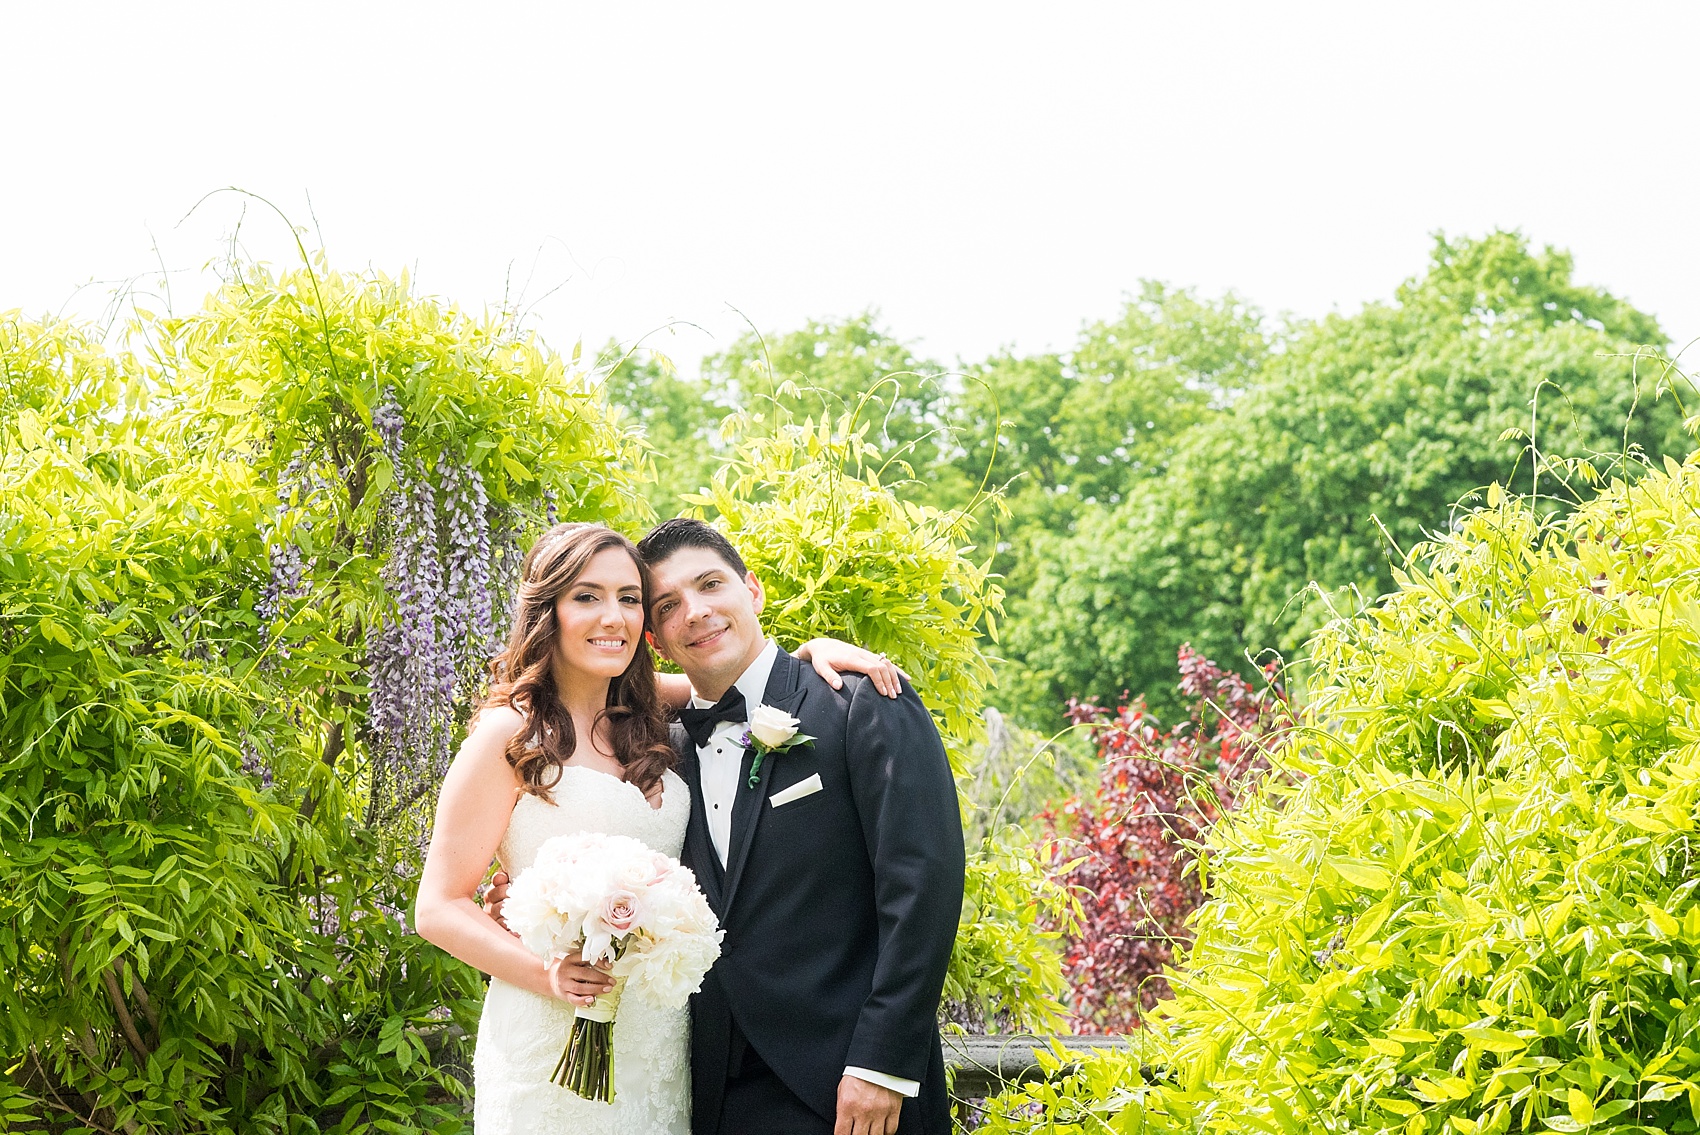 Bride and groom photos at a Skylands Manor wedding. Images by Mikkel Paige Photography, NJ wedding photographer.